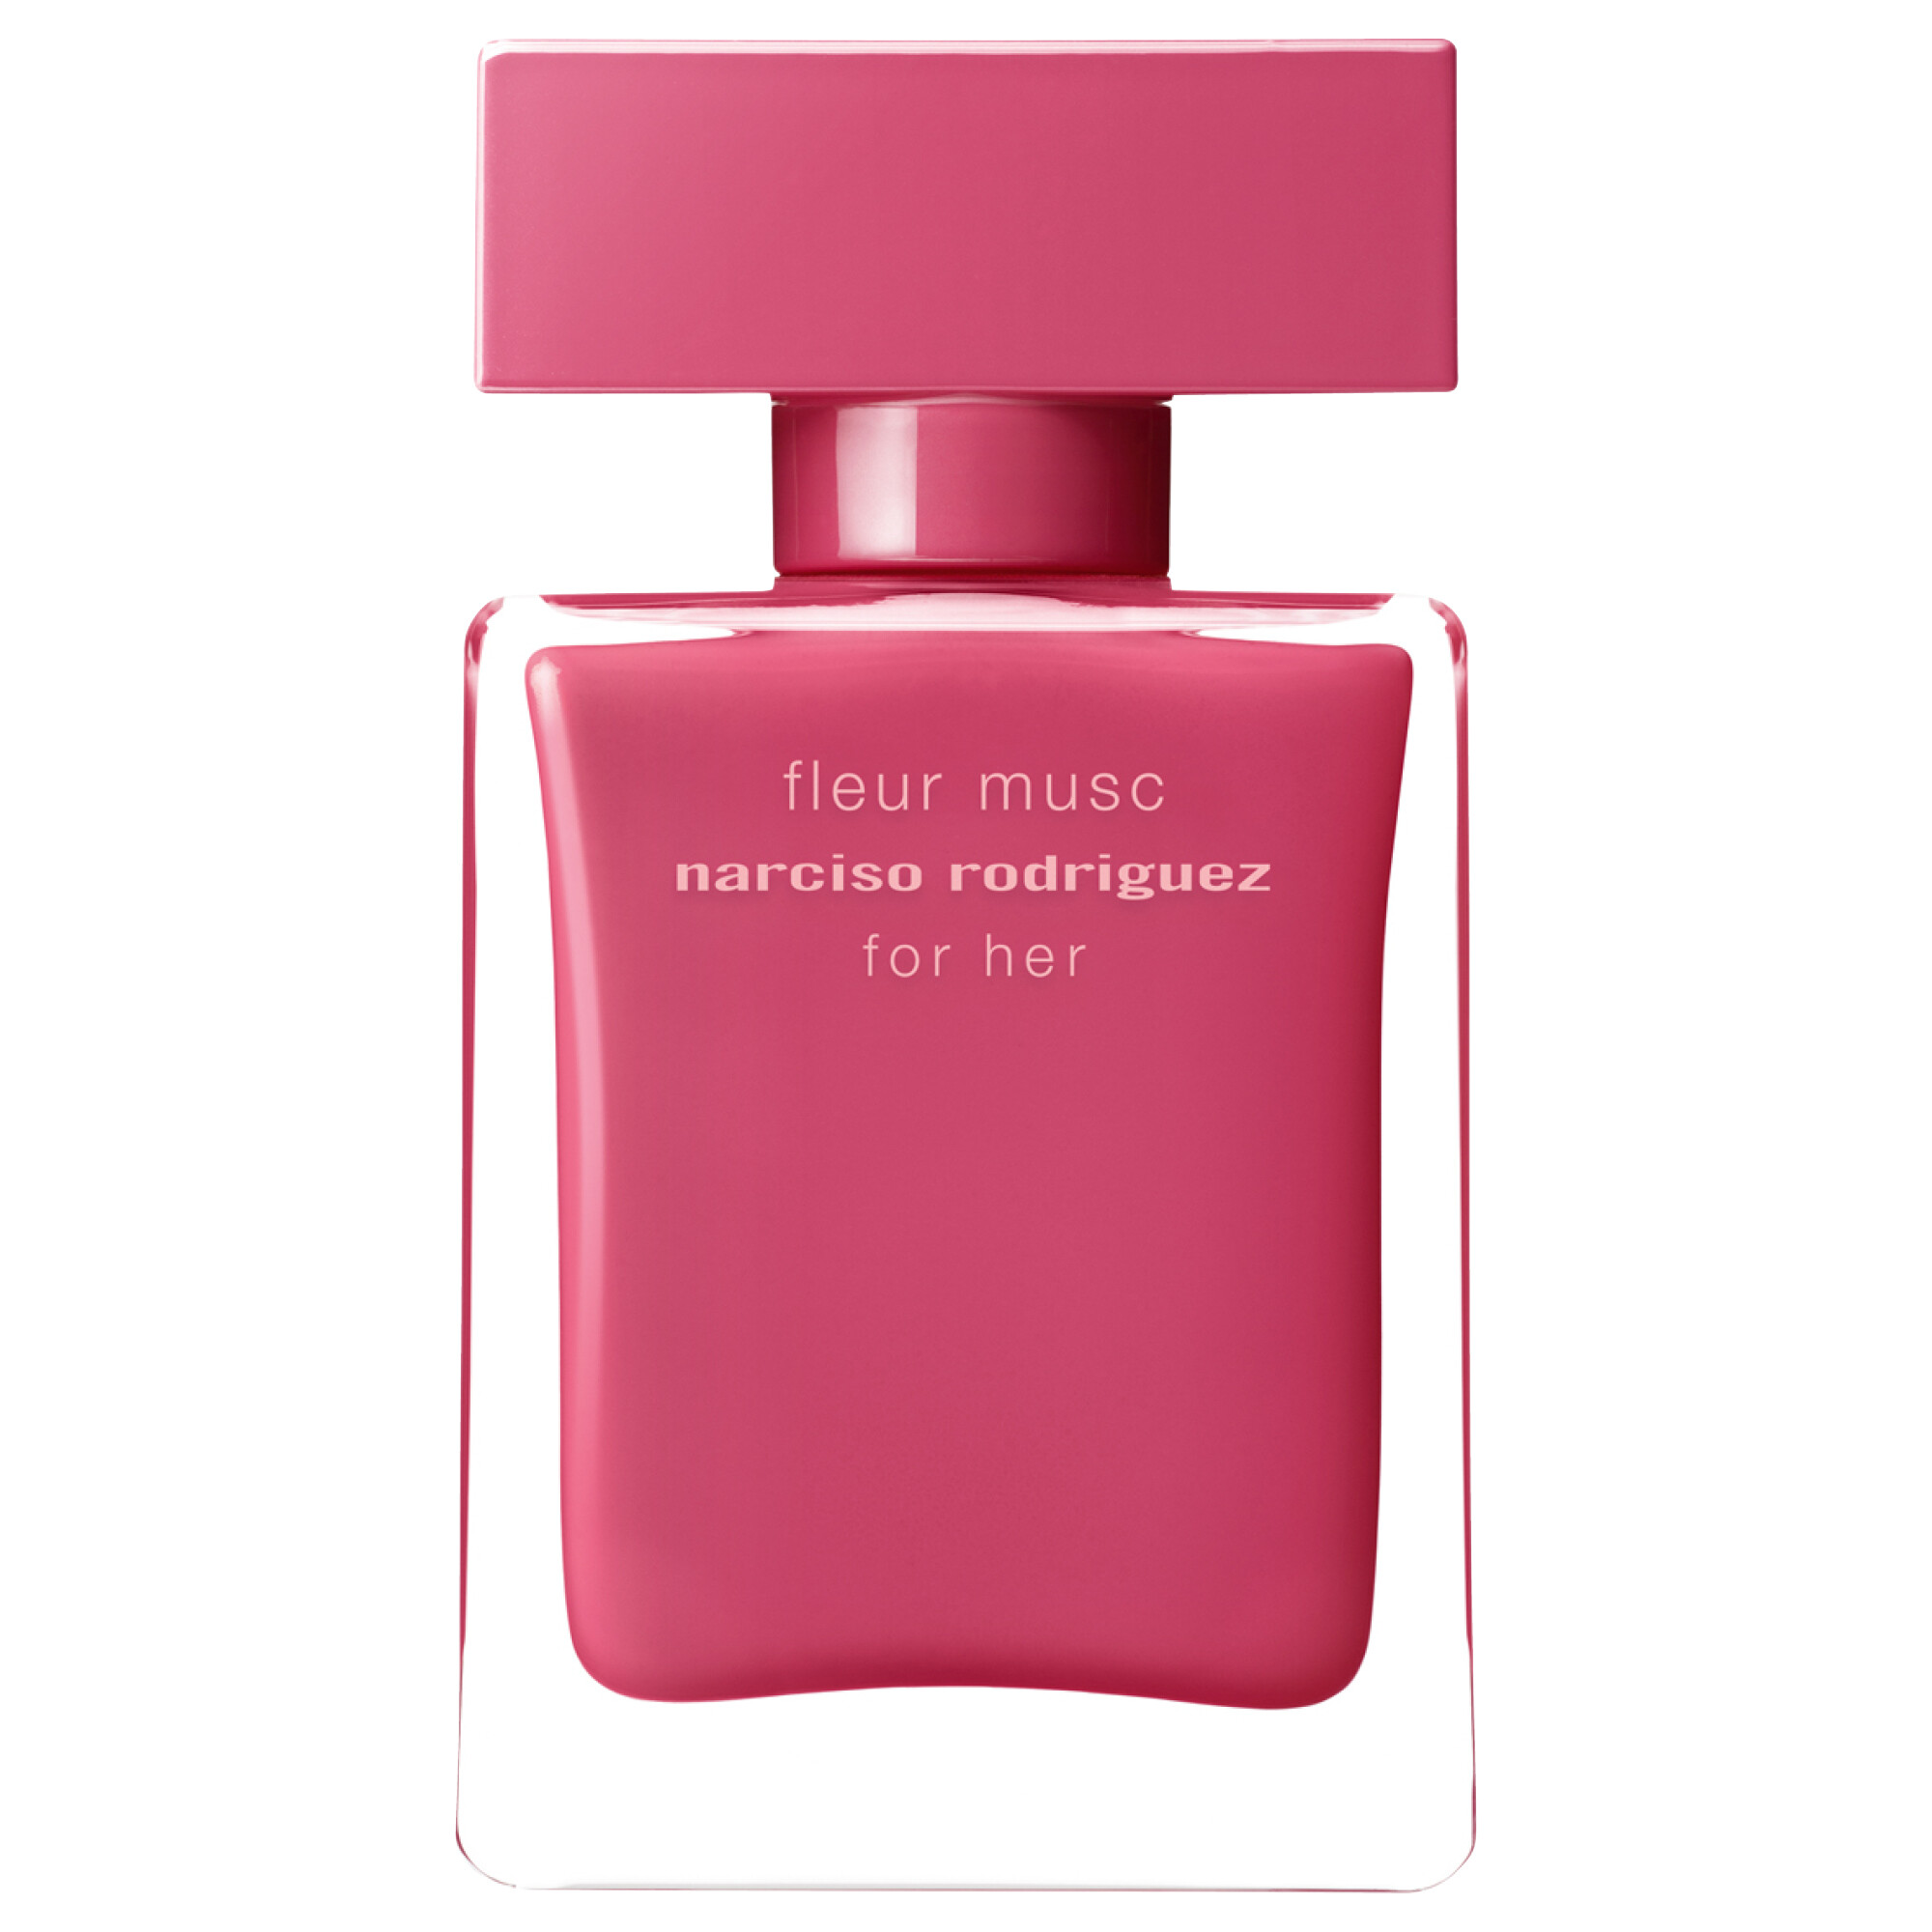 Narciso Rodriguez Narciso Rodriguez for her fleur musc kaufen